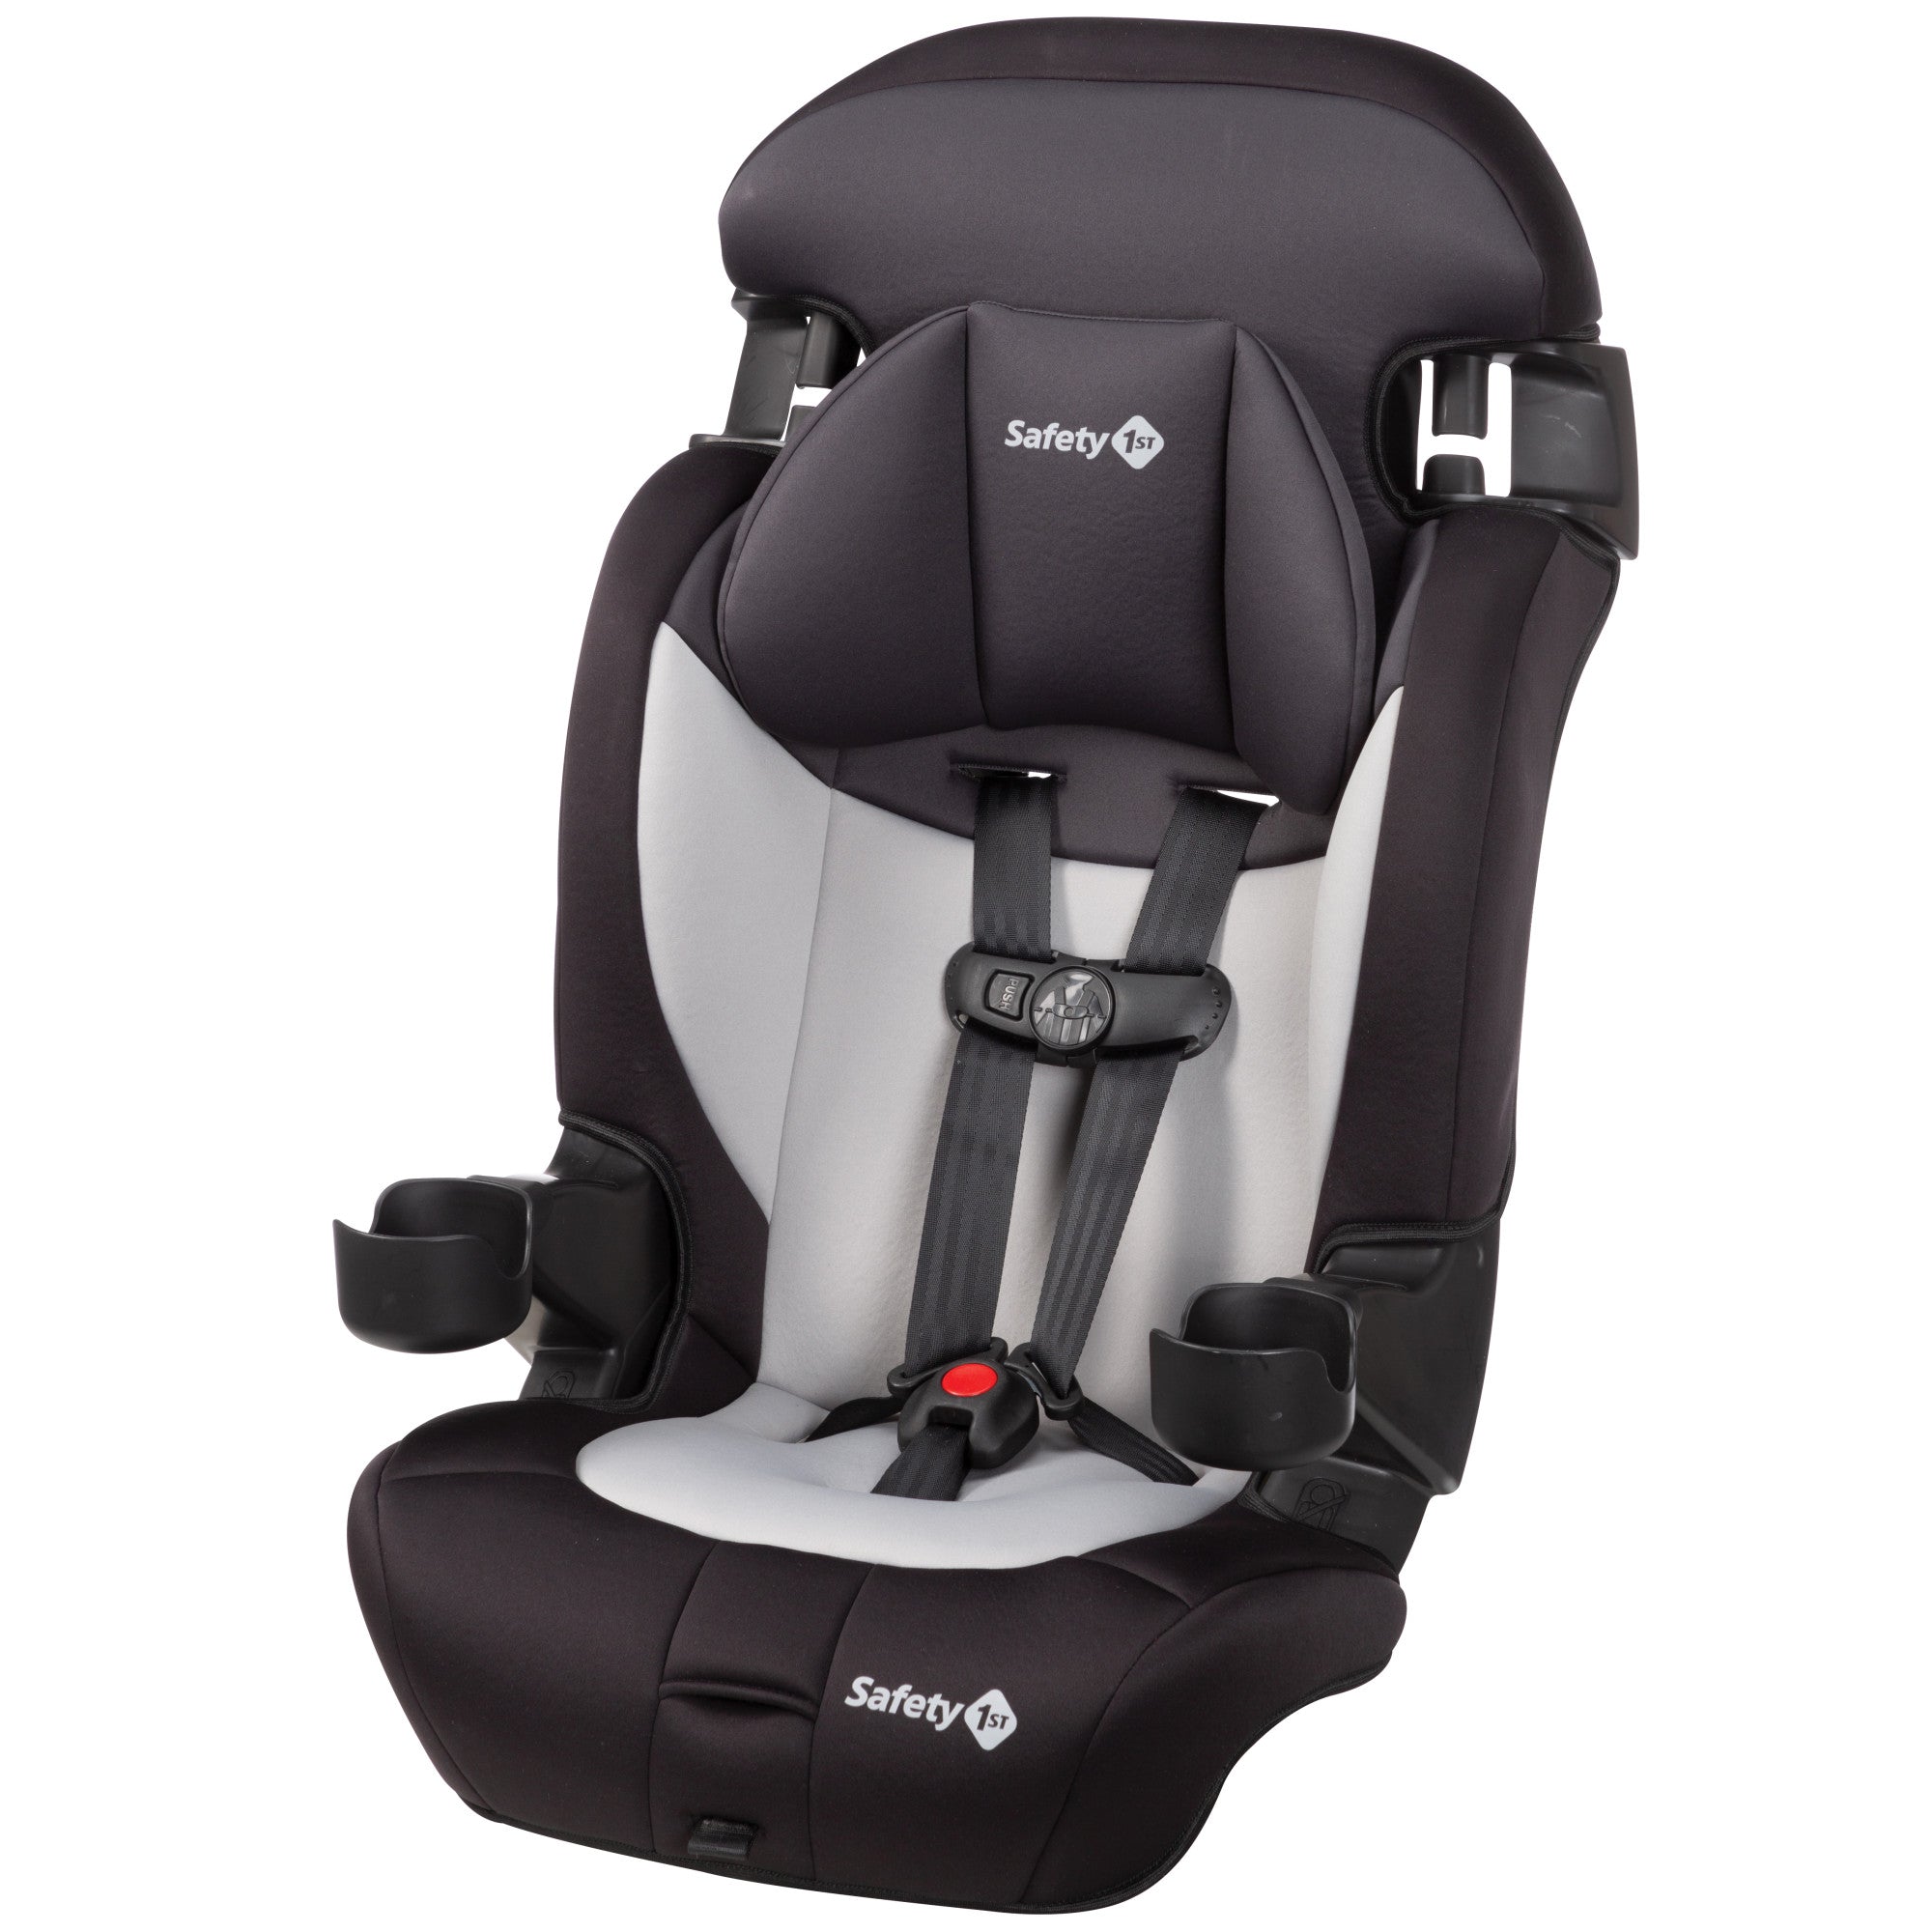 Safety 1st Grand 2-in-1 Booster Car Seat Black Sparrow